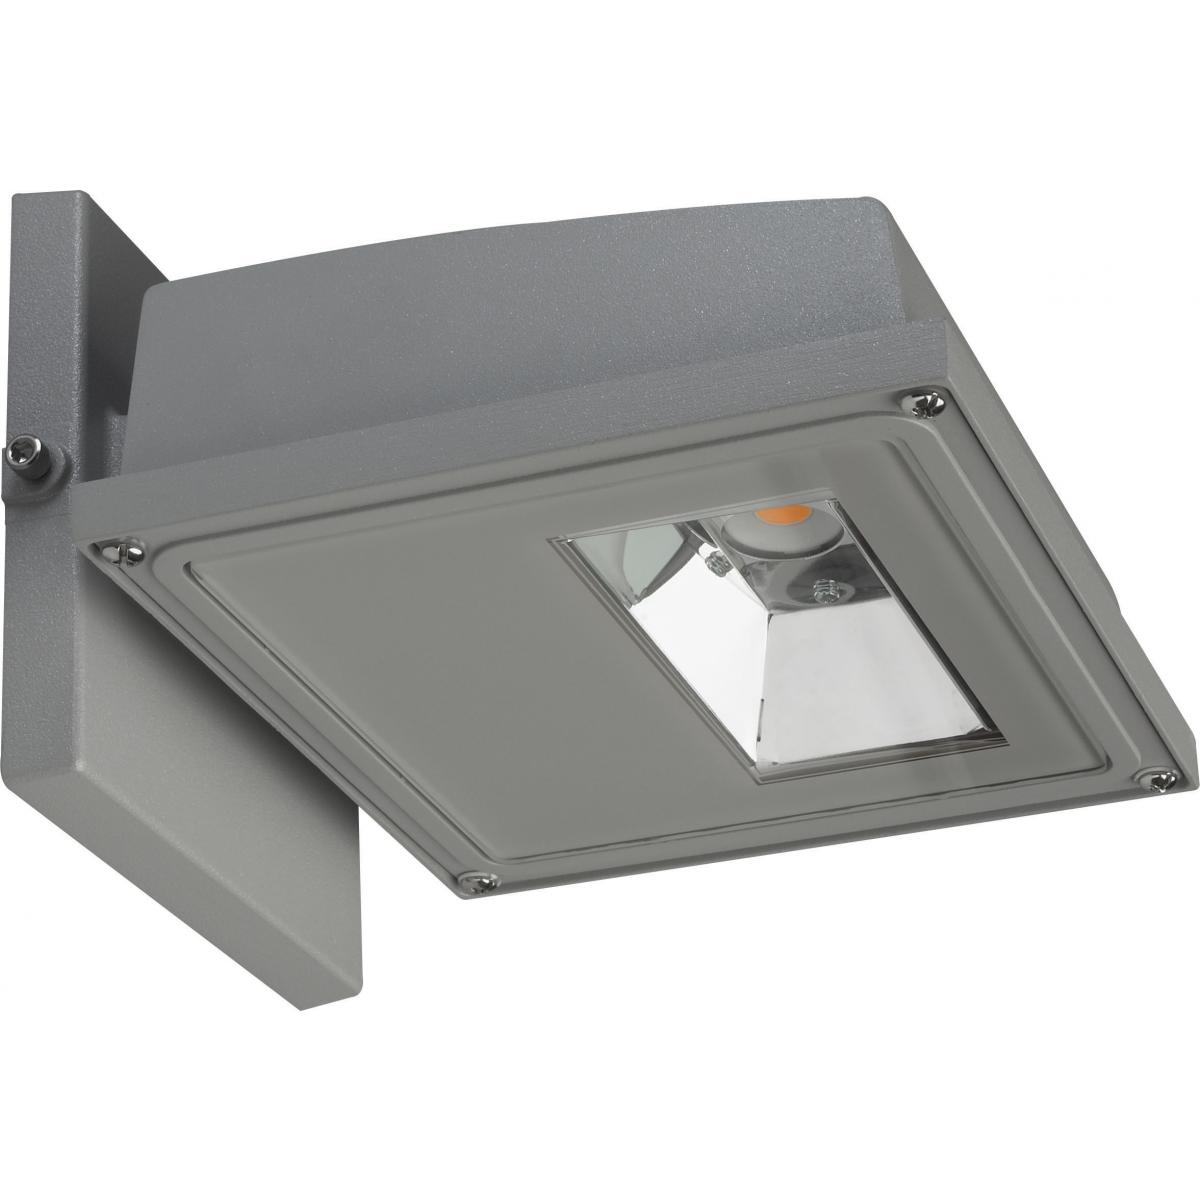 65-163 30W LED WALL PACK GRAY 3000K